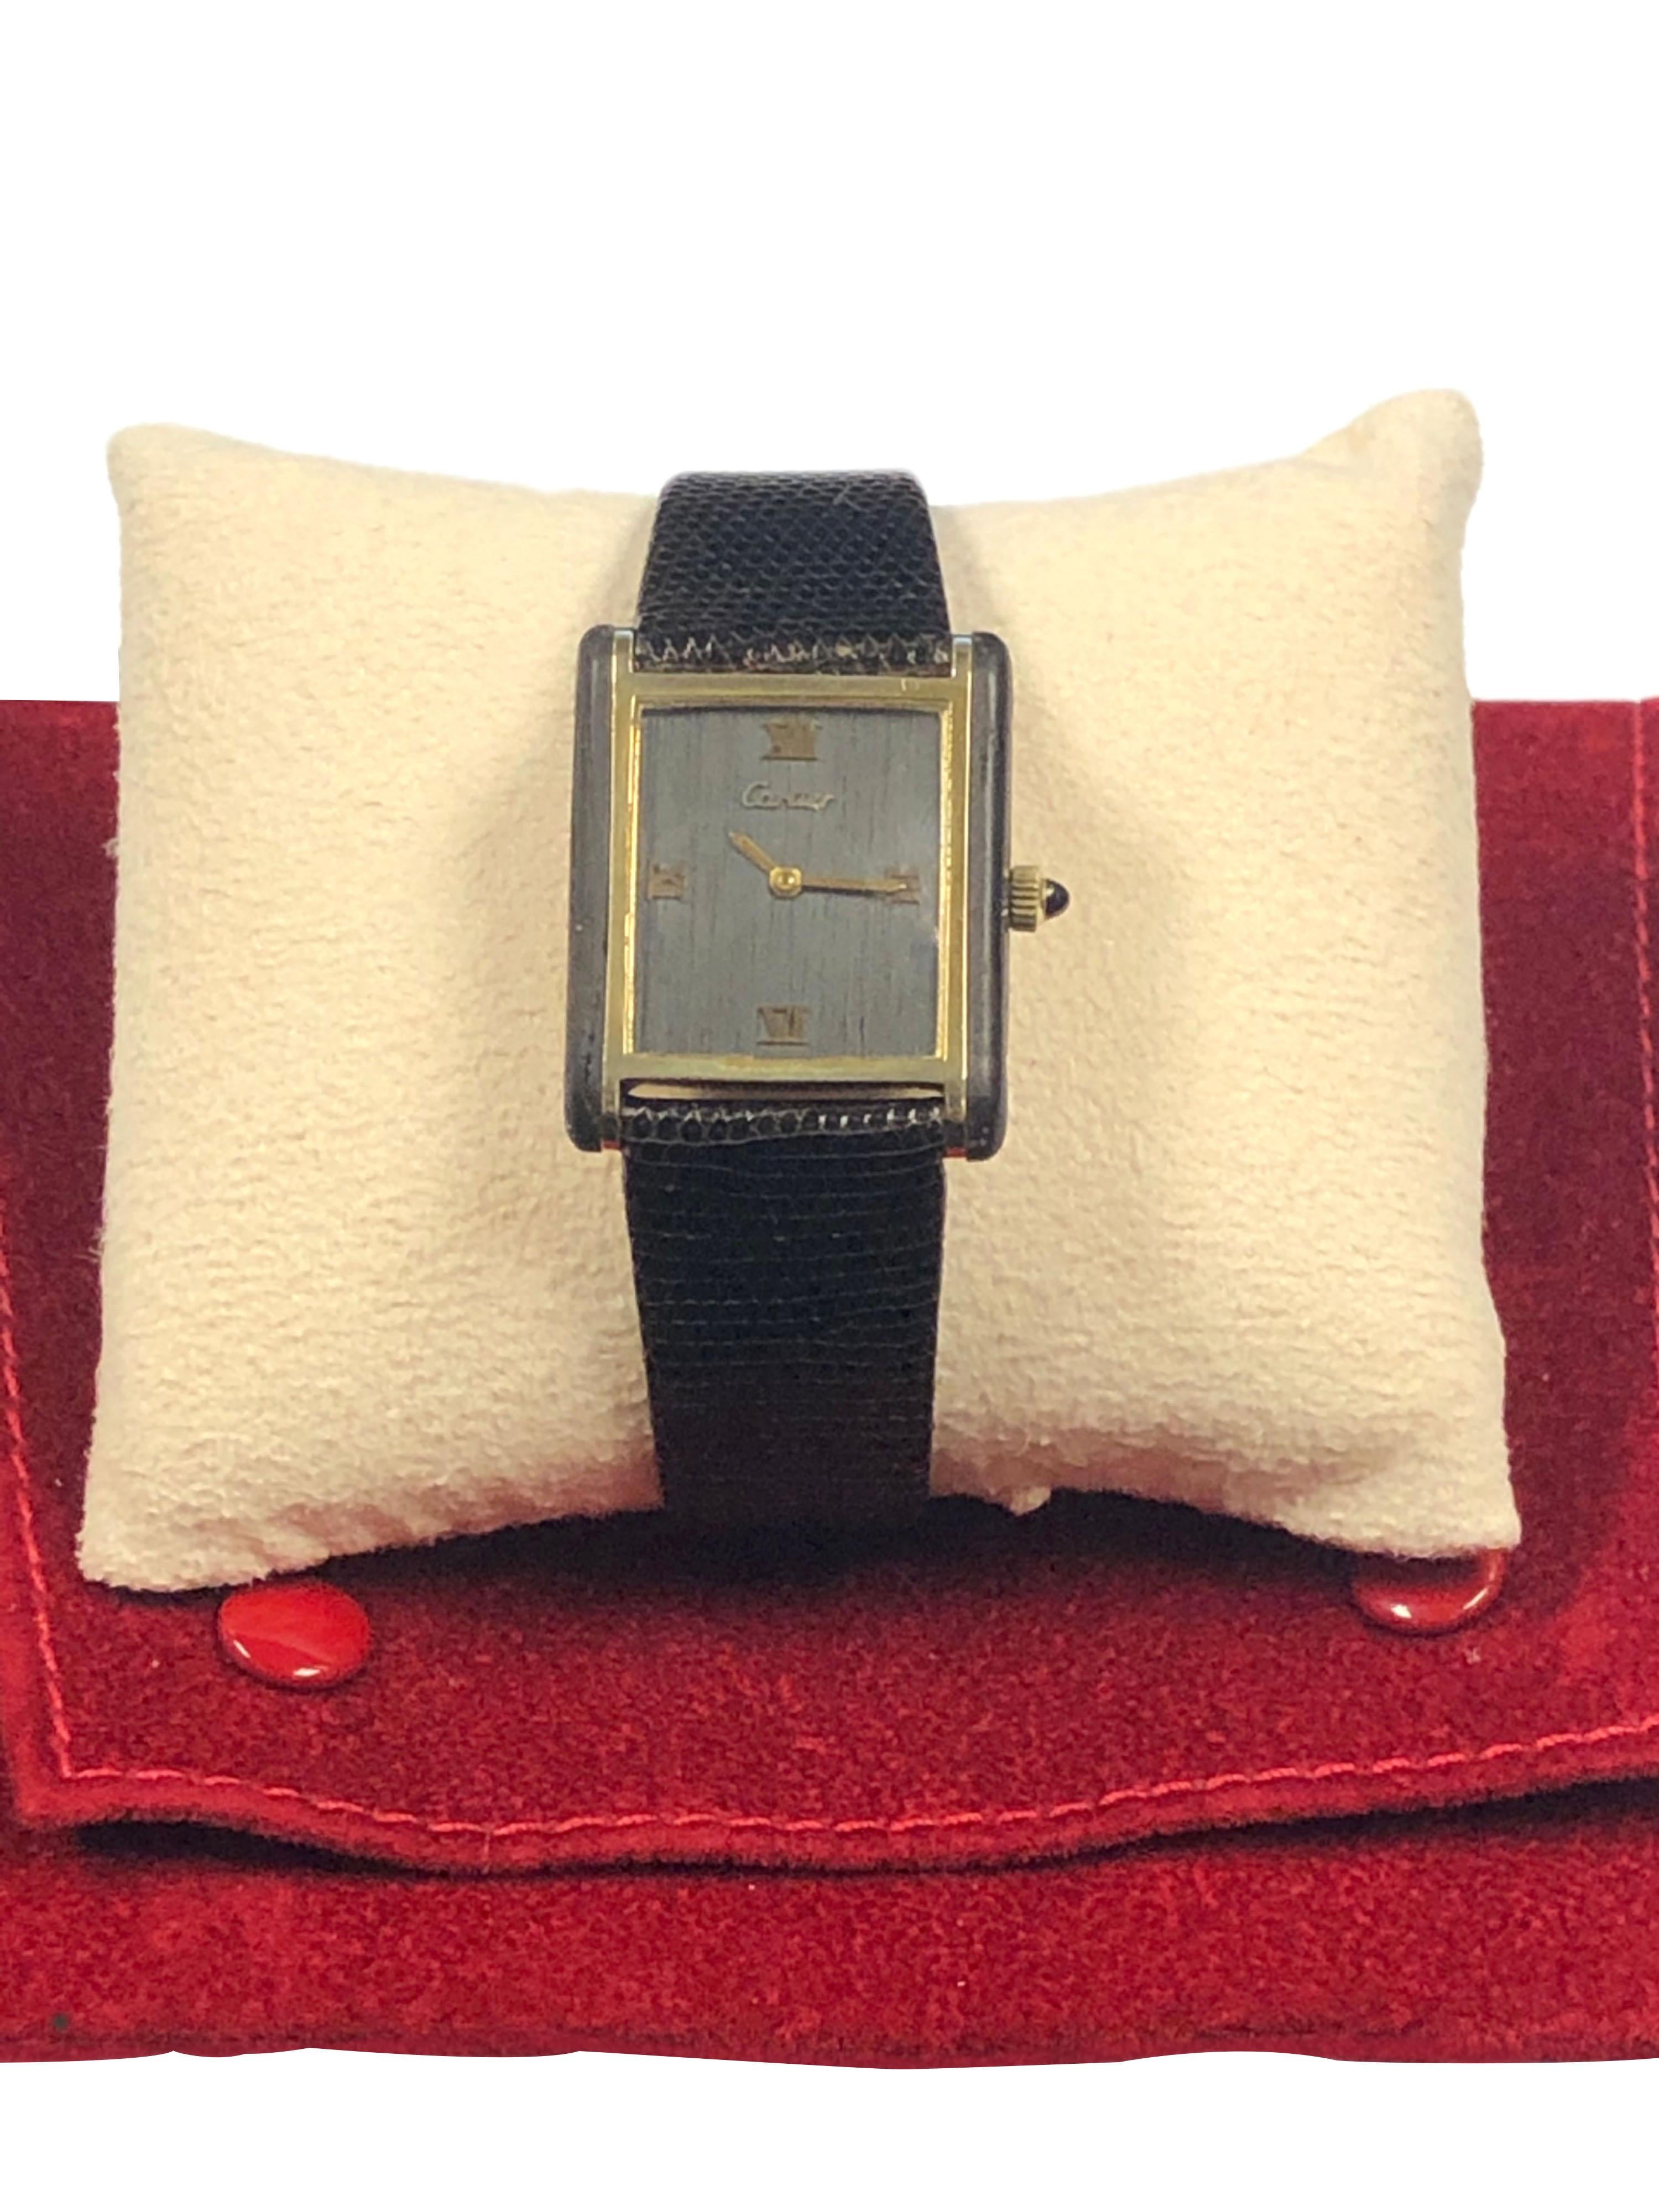 Women's or Men's Cartier Vintage Wood case and Dial Mechanical Wrist Watch